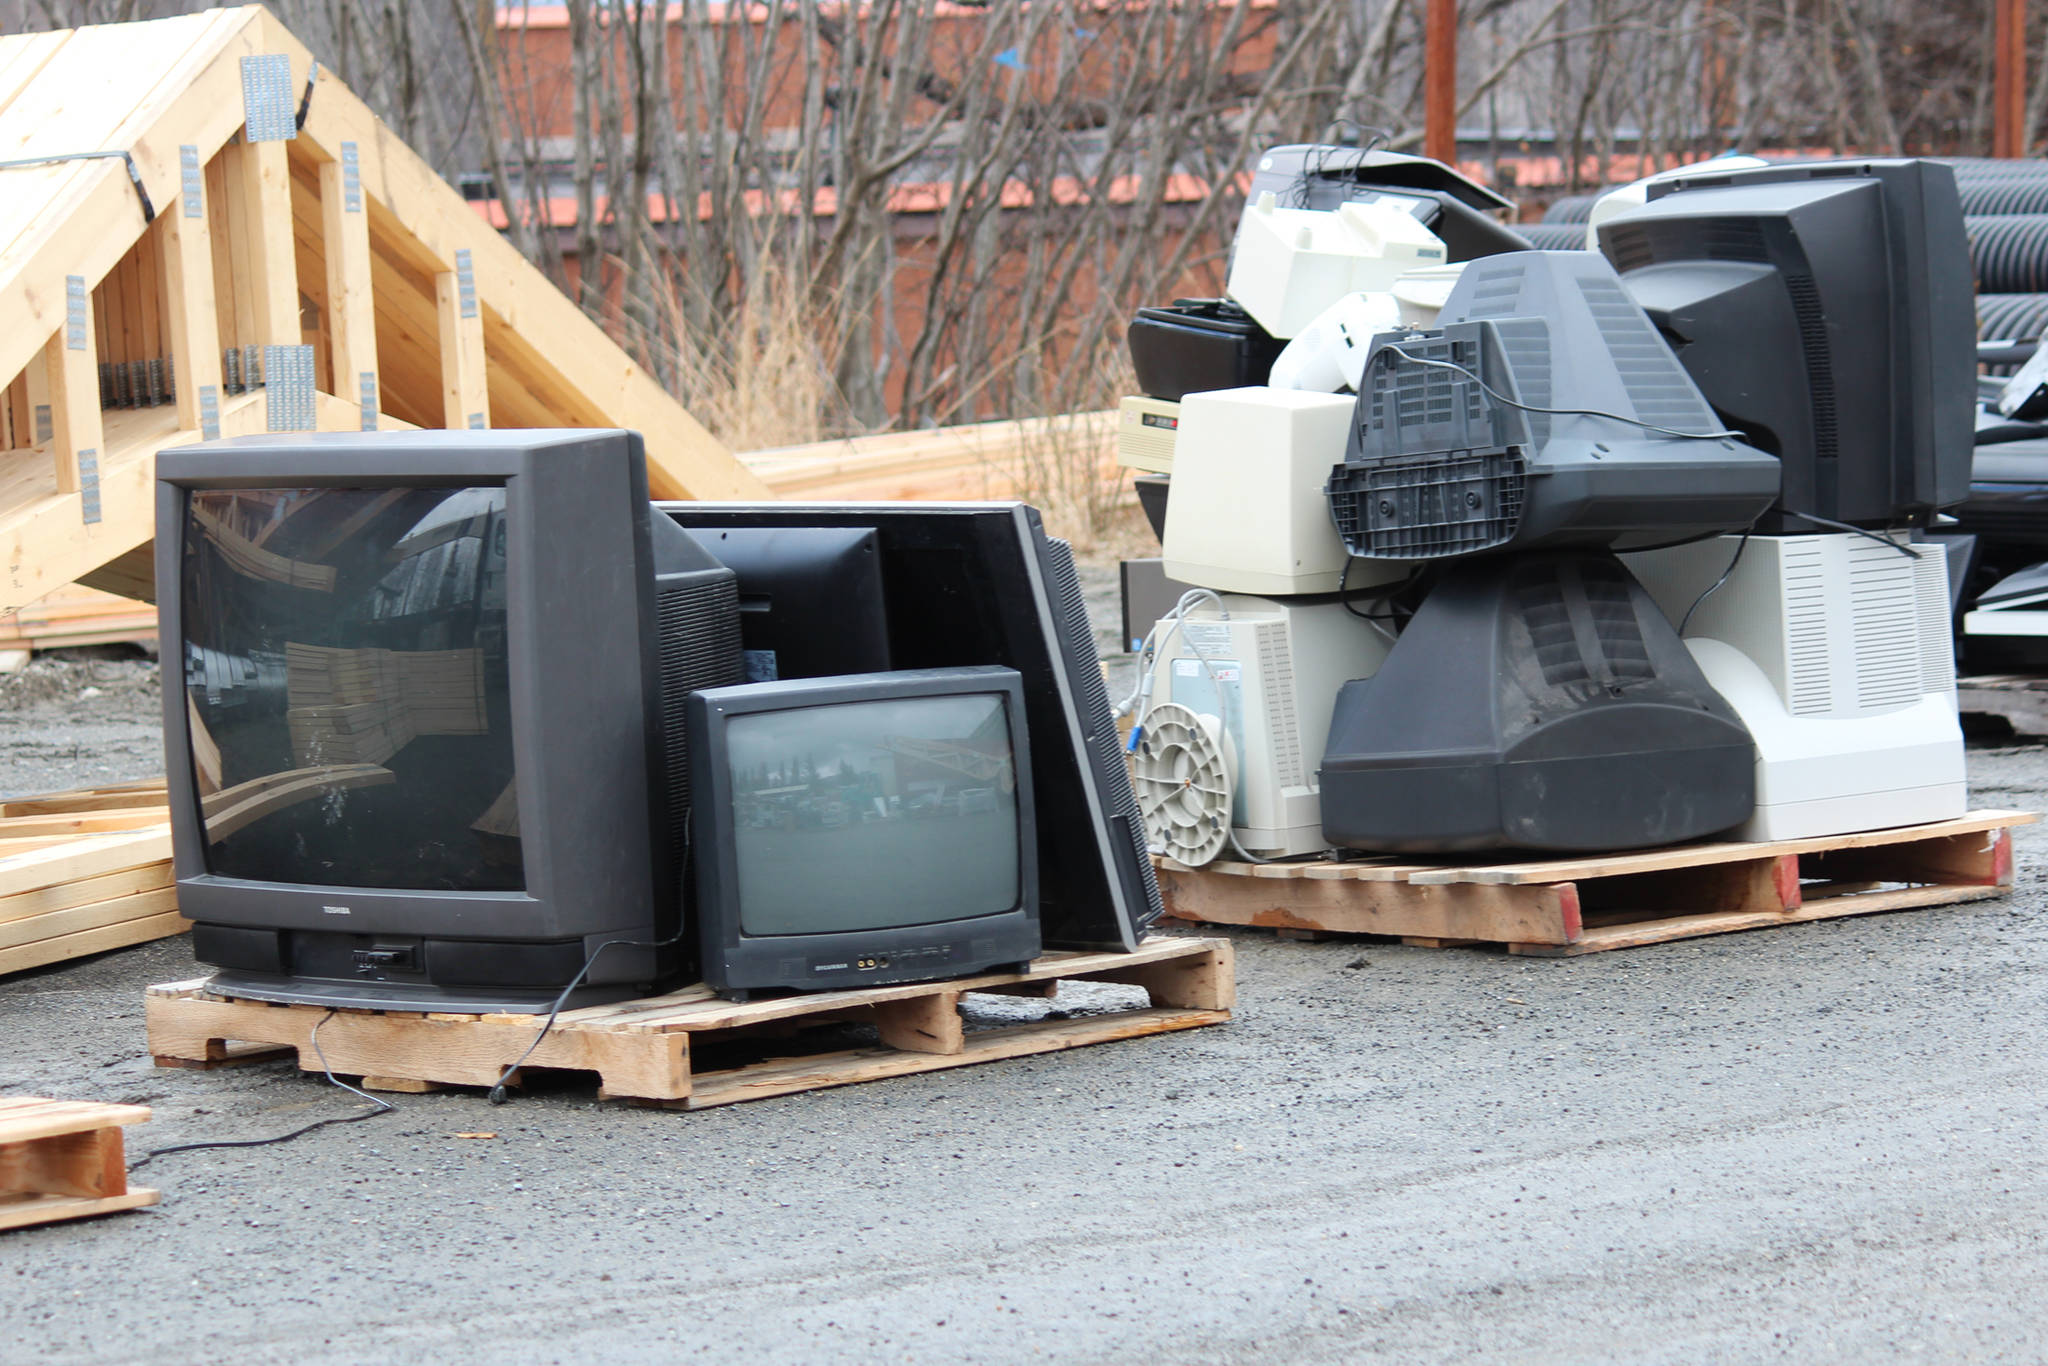 Old television sets rest on pallets during Cook Inletkeeper’s annual electronic recycling event Saturday, May 5, 2018 behind Spenard Builders Supply in Homer, Alaska. Television sets, especially older ones, are important to recycle because they contain substances like mercury that are harmful to the environment. (Photo by Megan Pacer/Homer News)